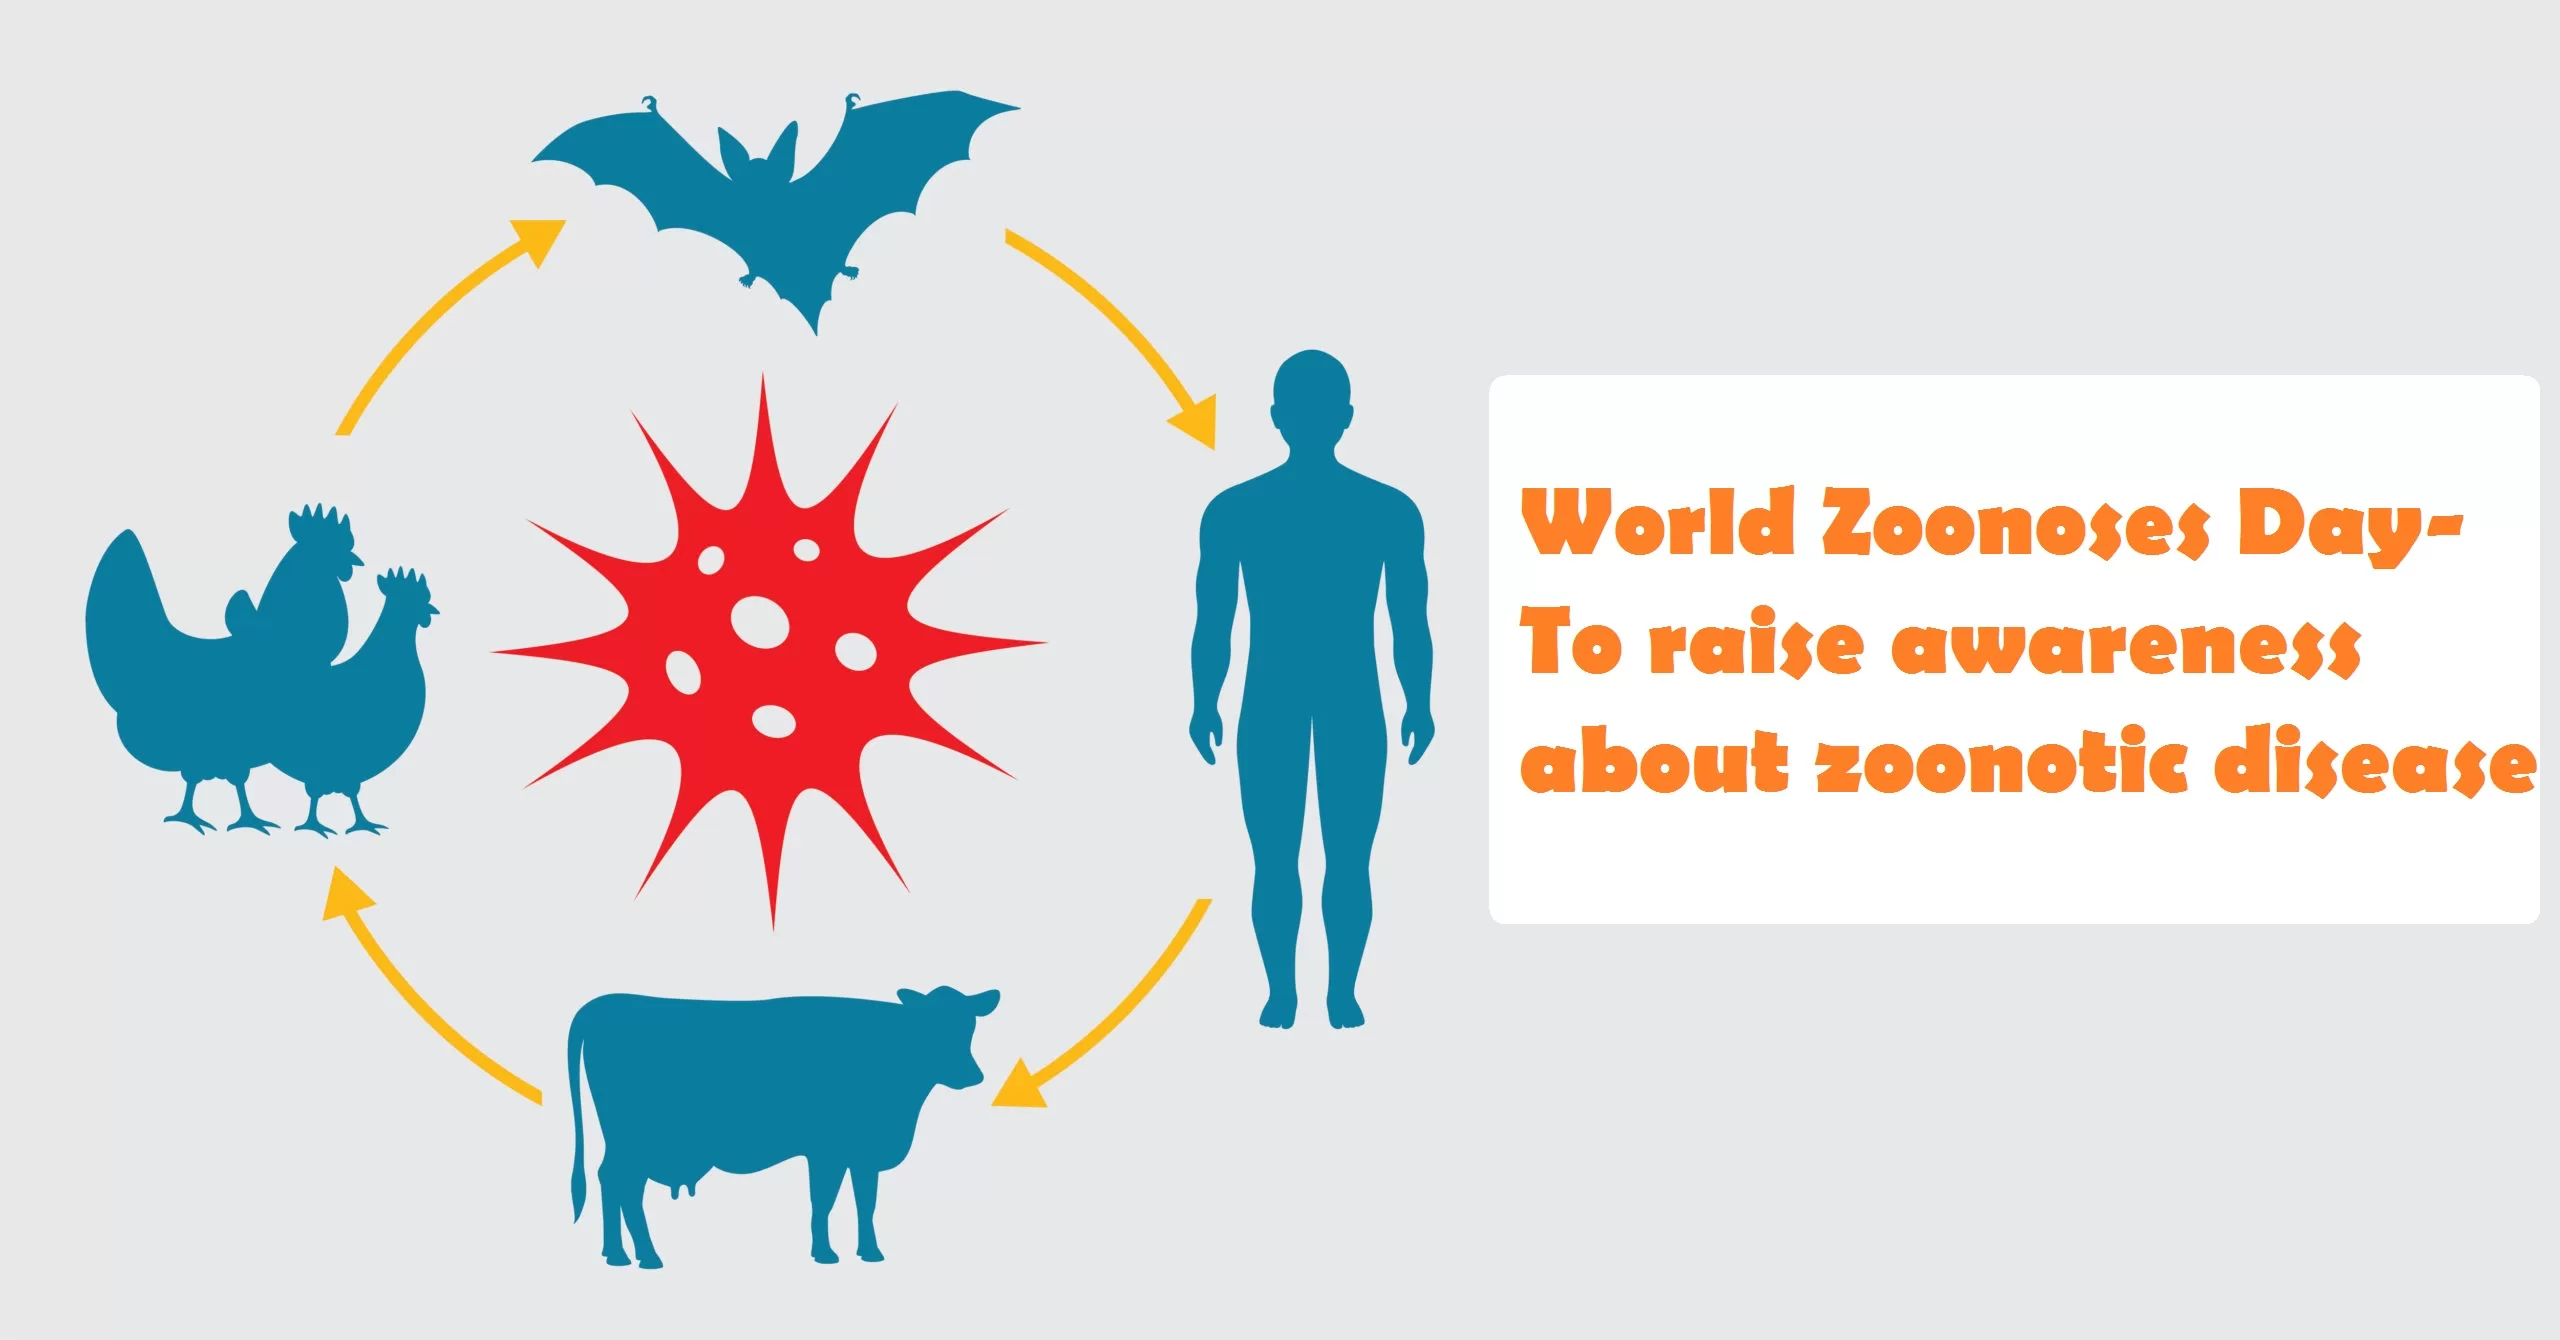 World Zoonoses Day